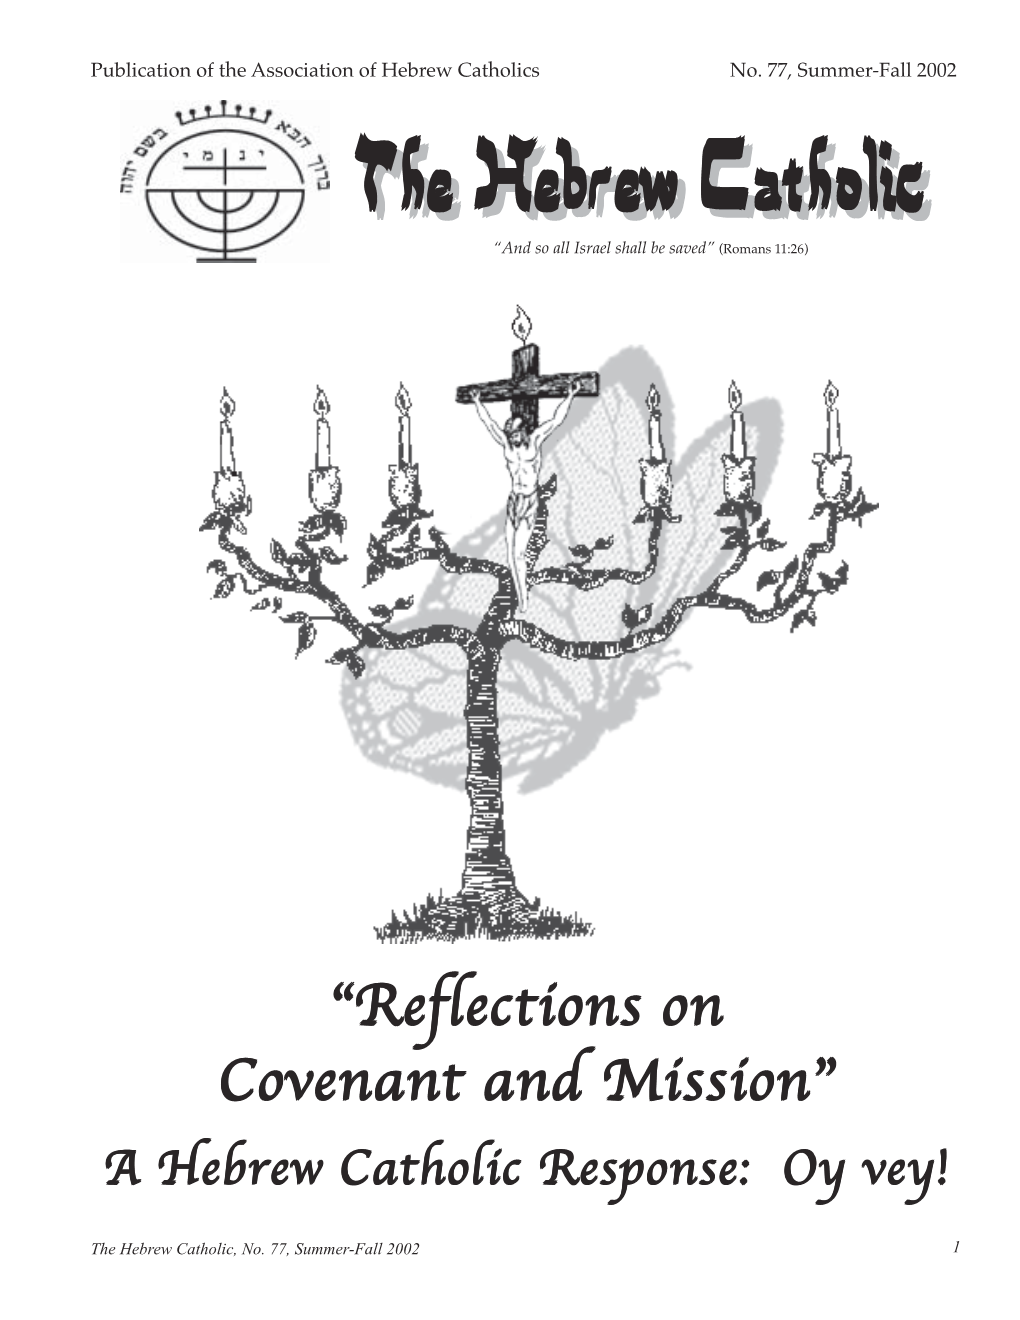 “Reflections on Covenant and Mission”